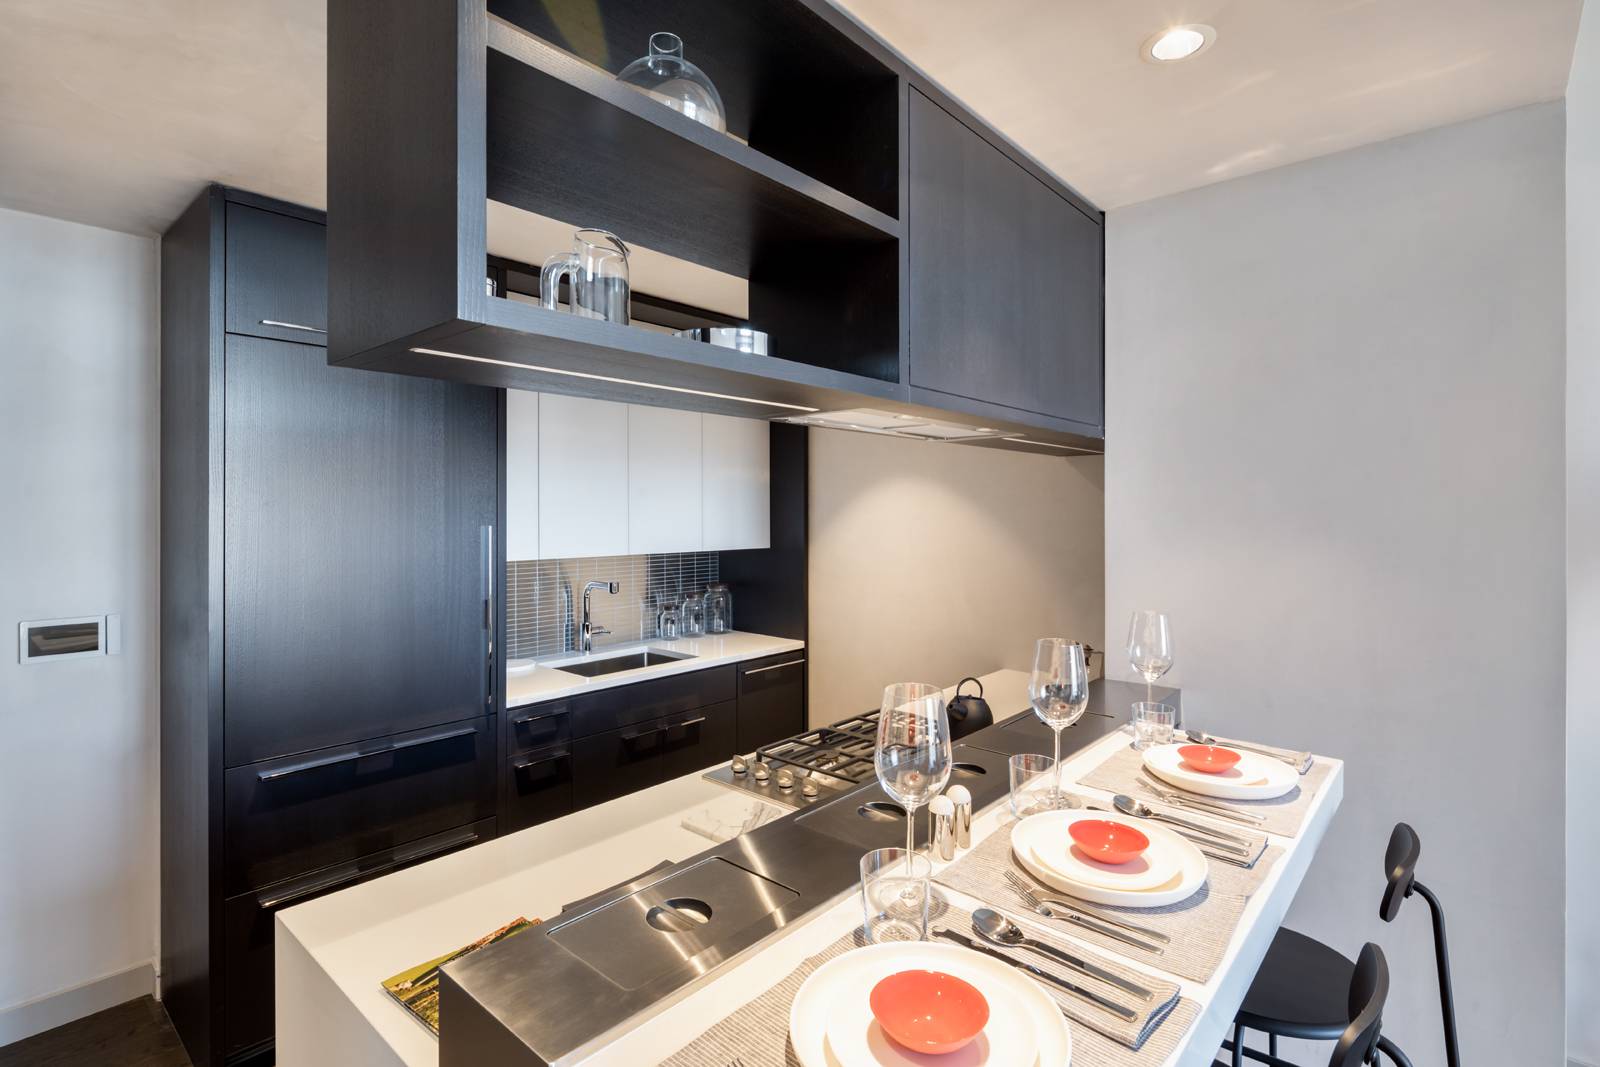 Residence 9G is a 723 square foot one bedroom, one bathroom with an open gourmet kitchen and breakfast bar.